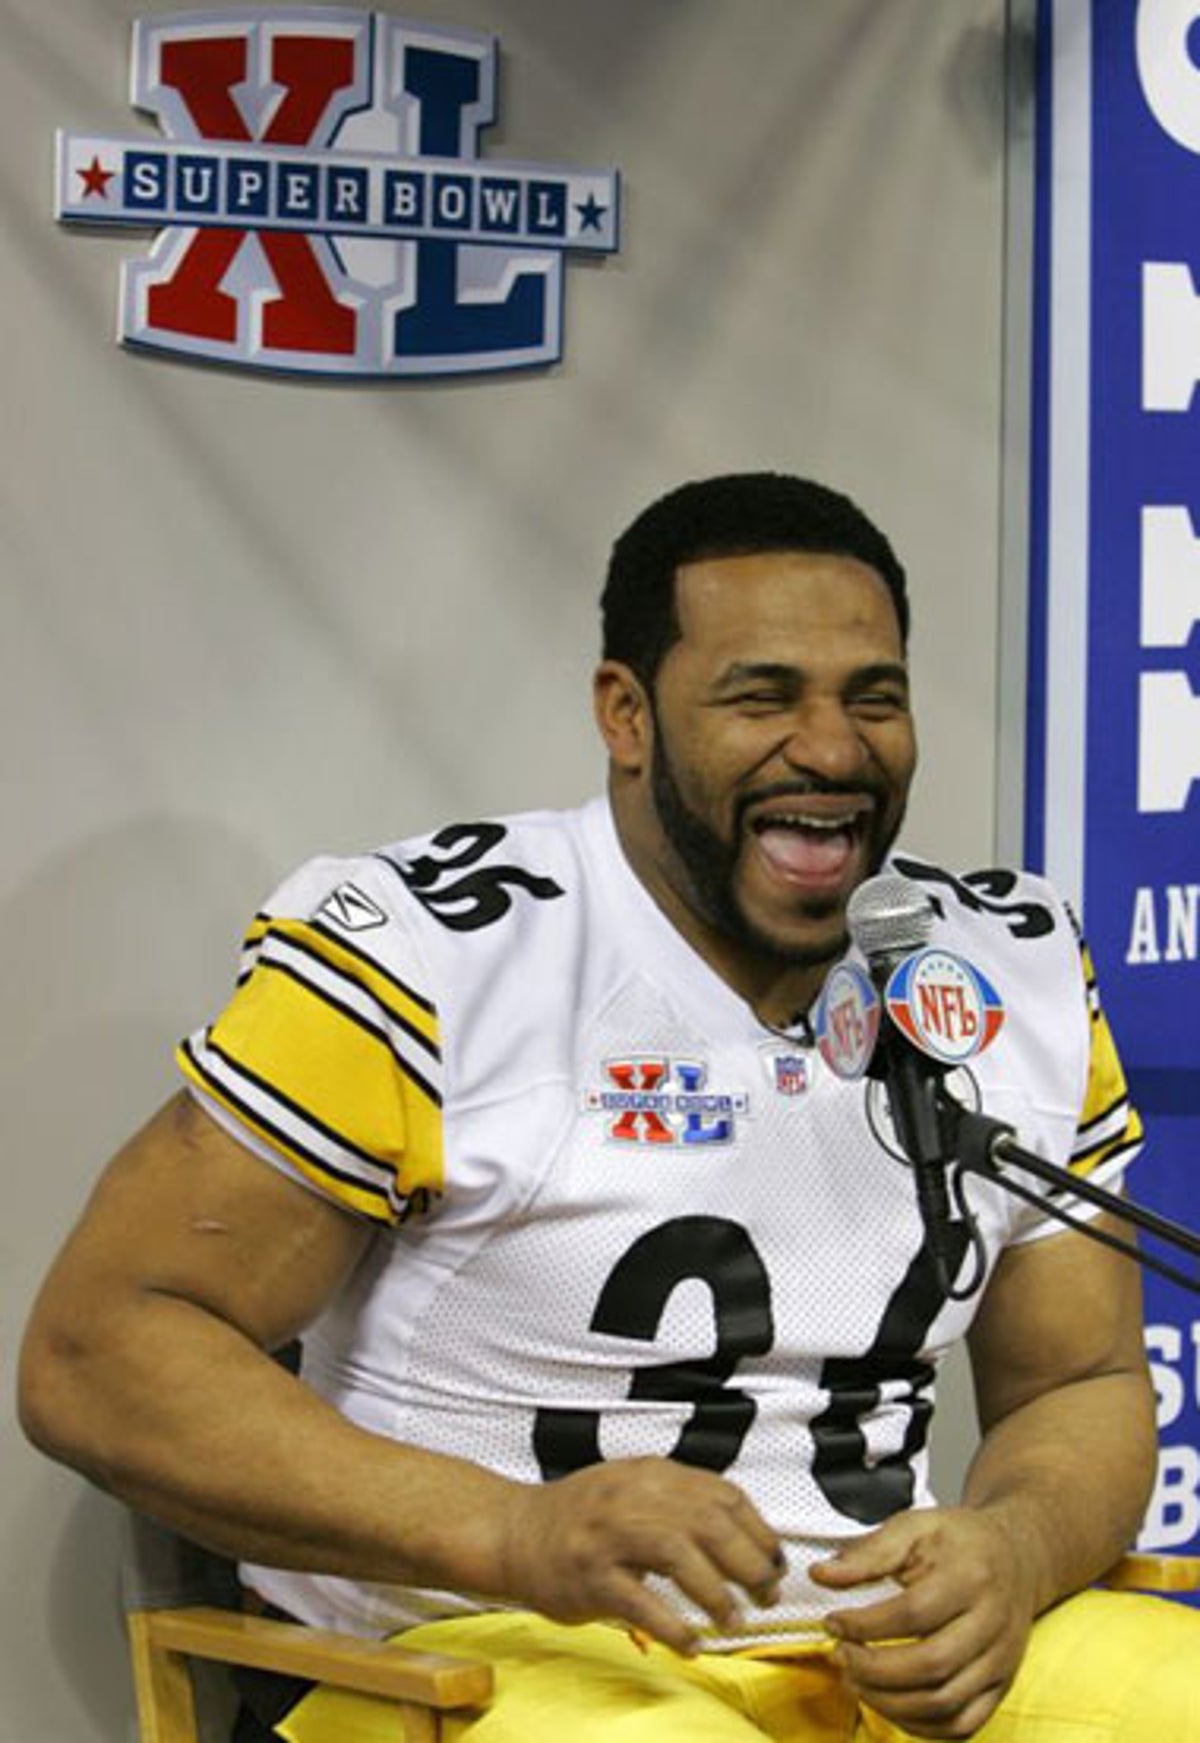 Jerome 'The Bus' Bettis comes back to school: Steelers great